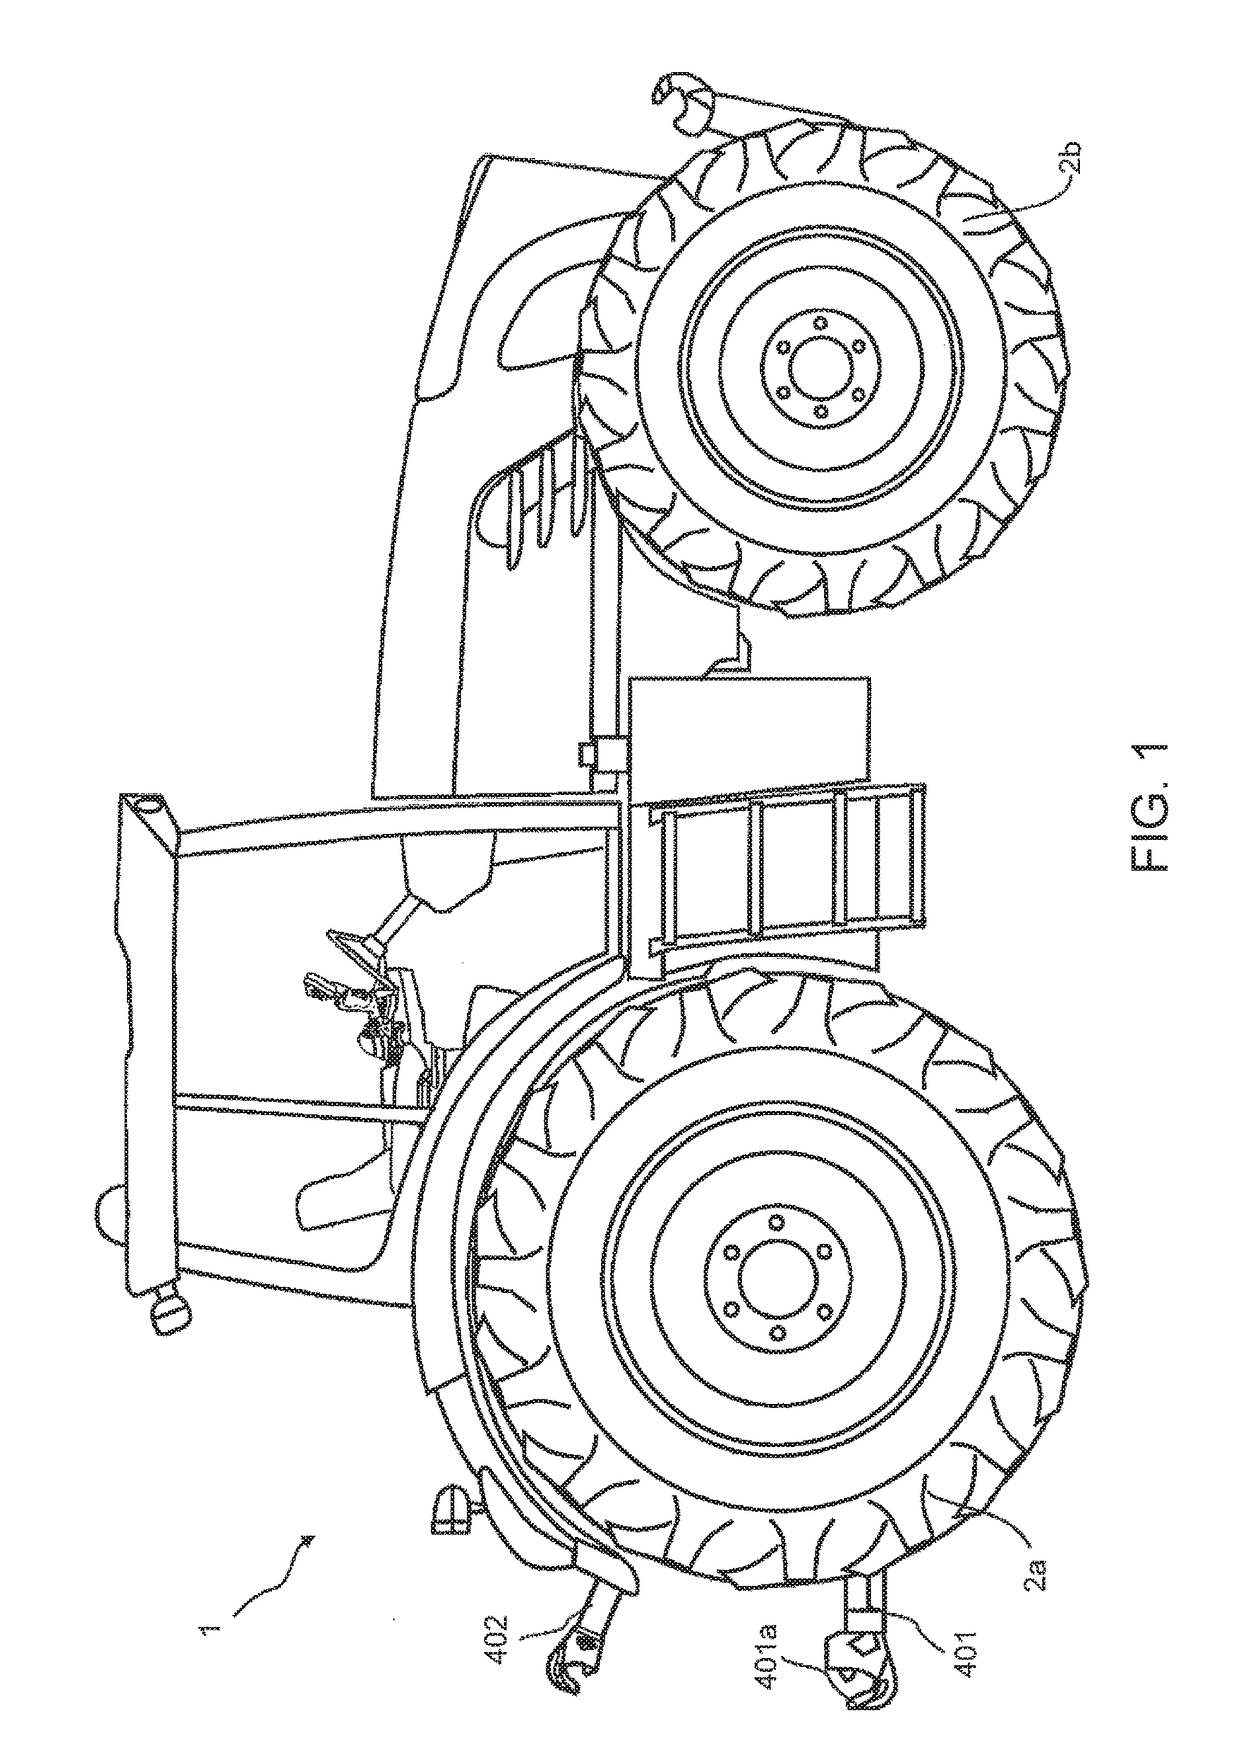 Draft force detection on a vehicle having a linkage